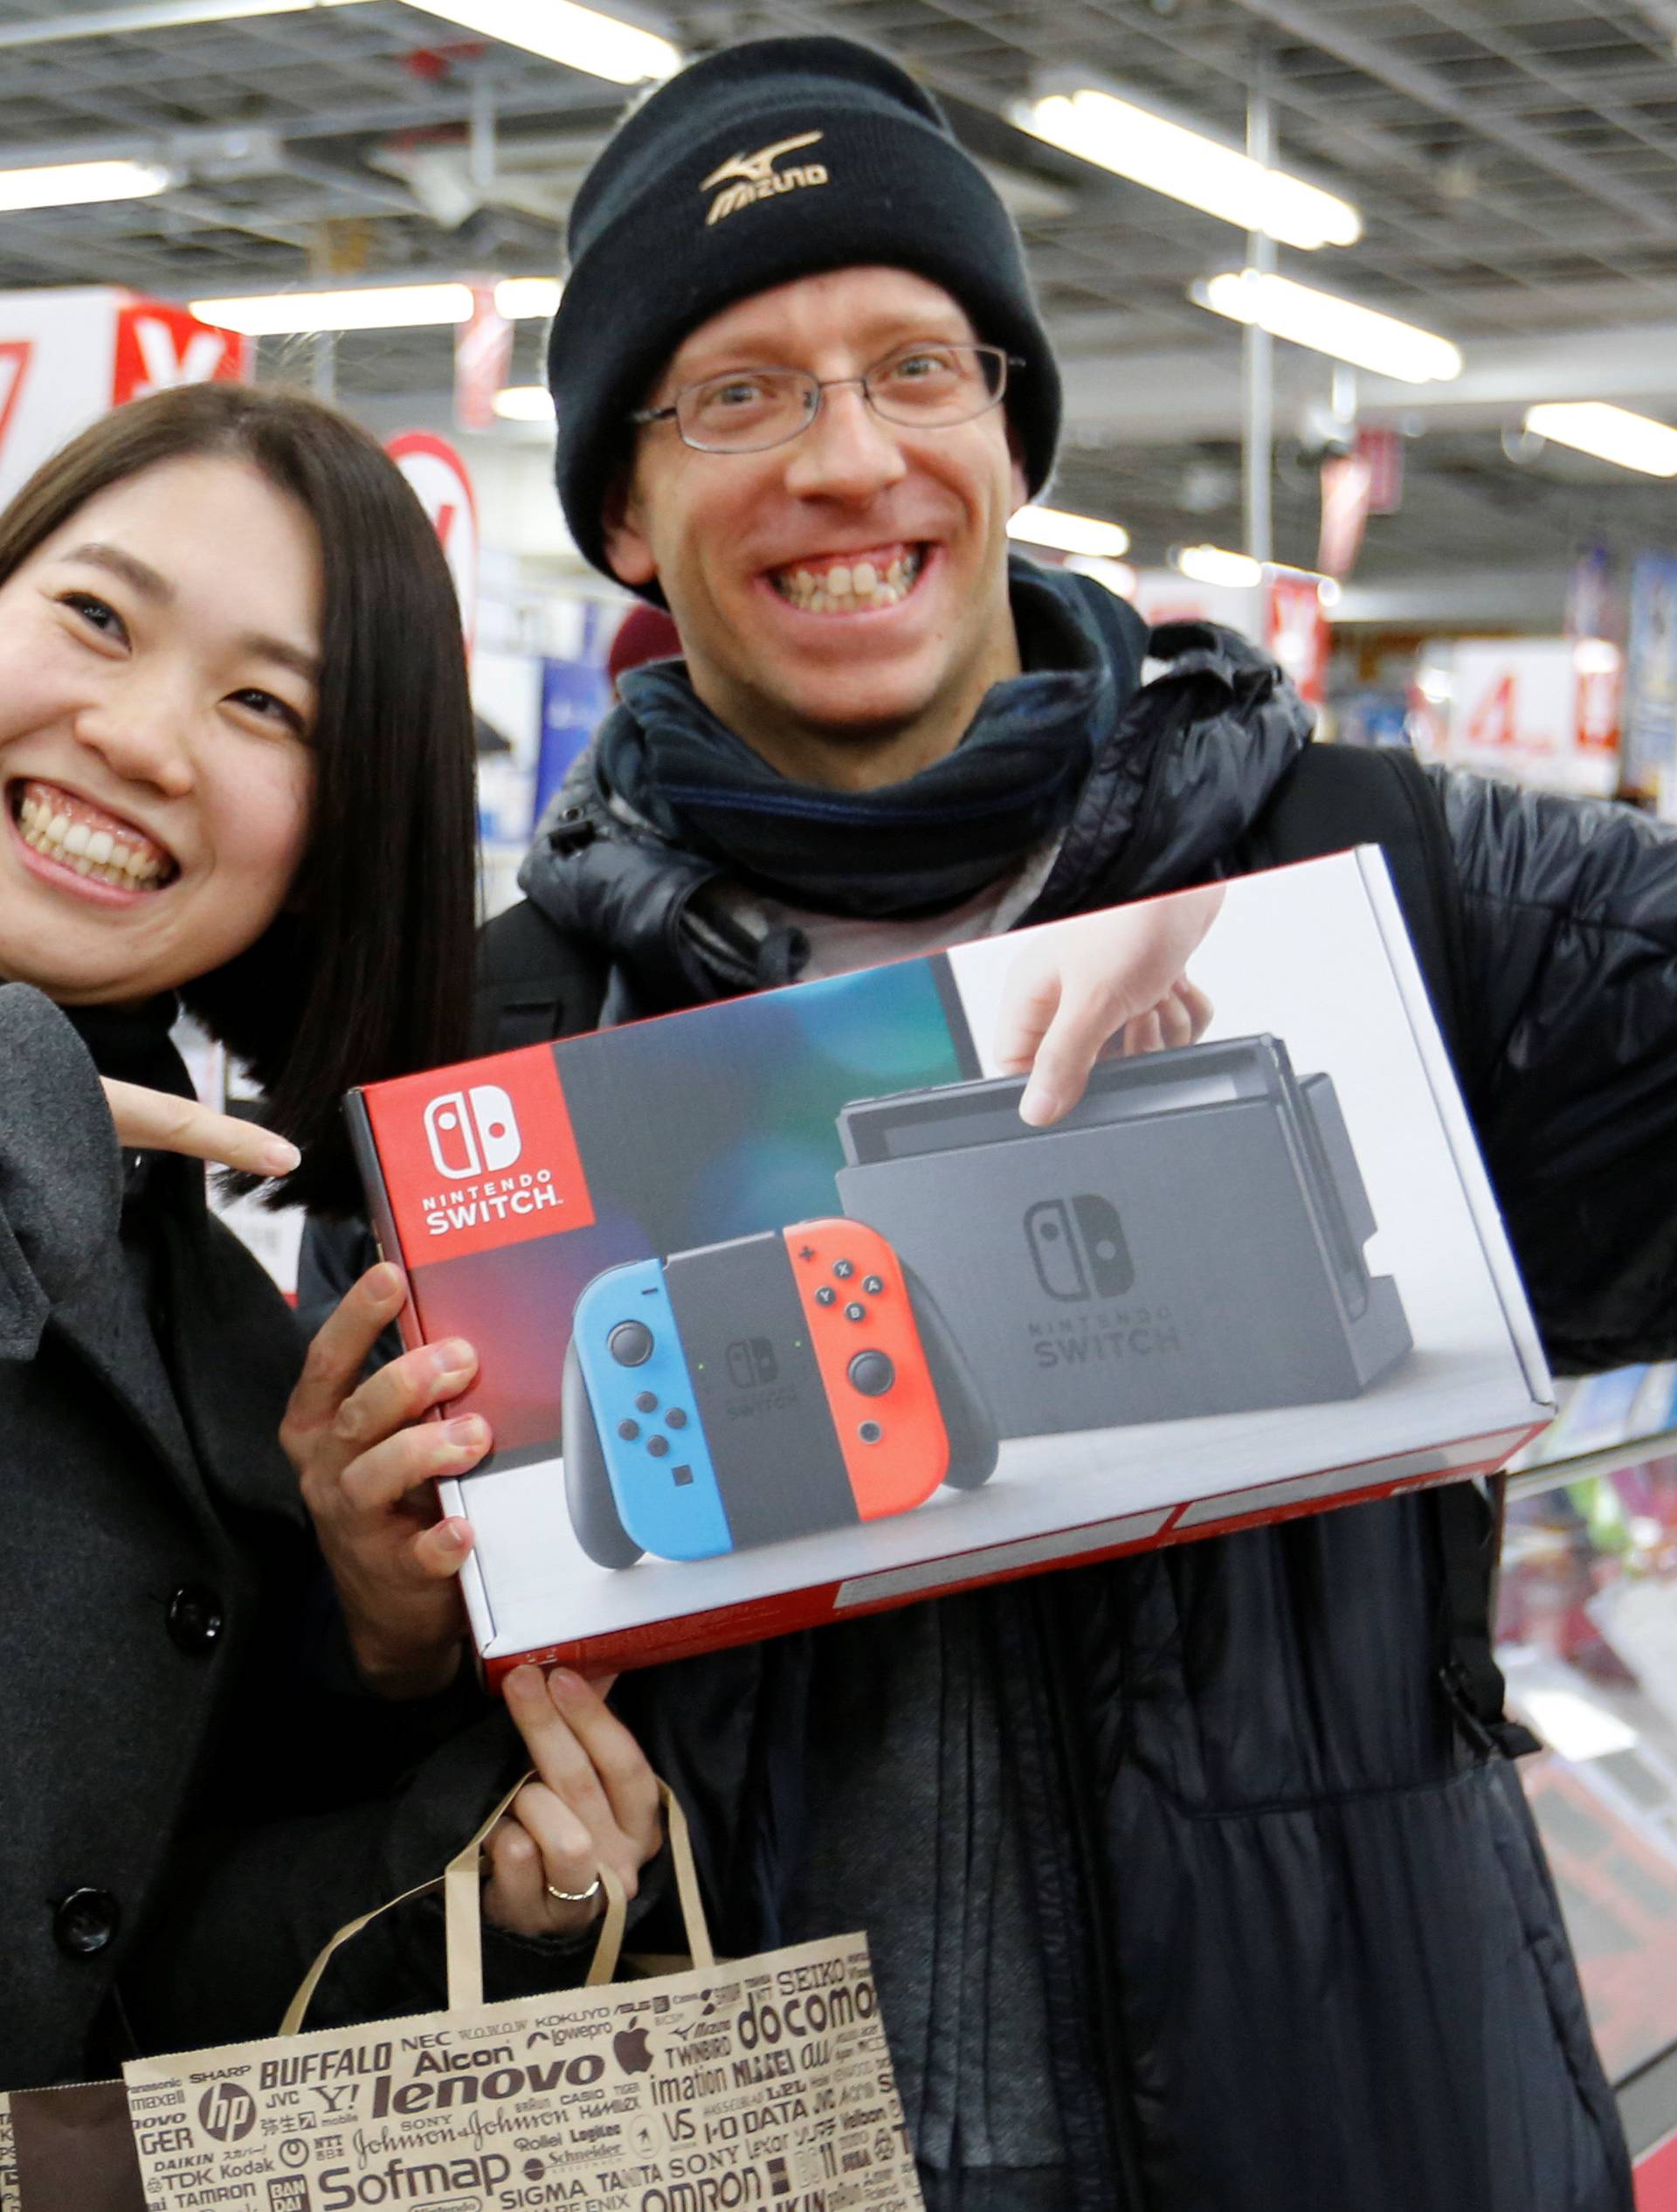 Nao Imoto and her husband David Flores poses with their Nintendo Switch game console after buying it at an electronics store in Tokyo